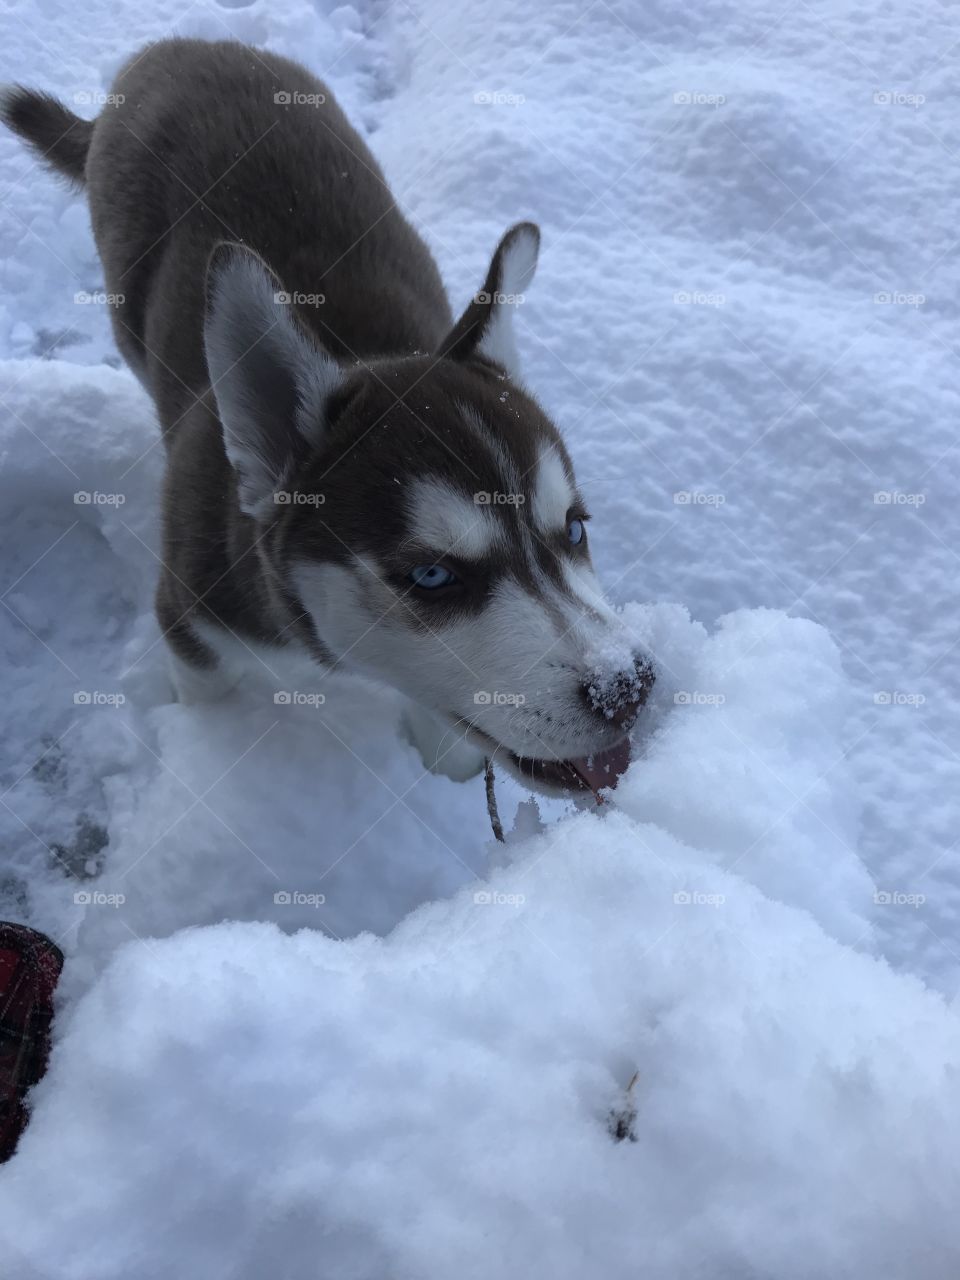 Just a husky eating some snow!!